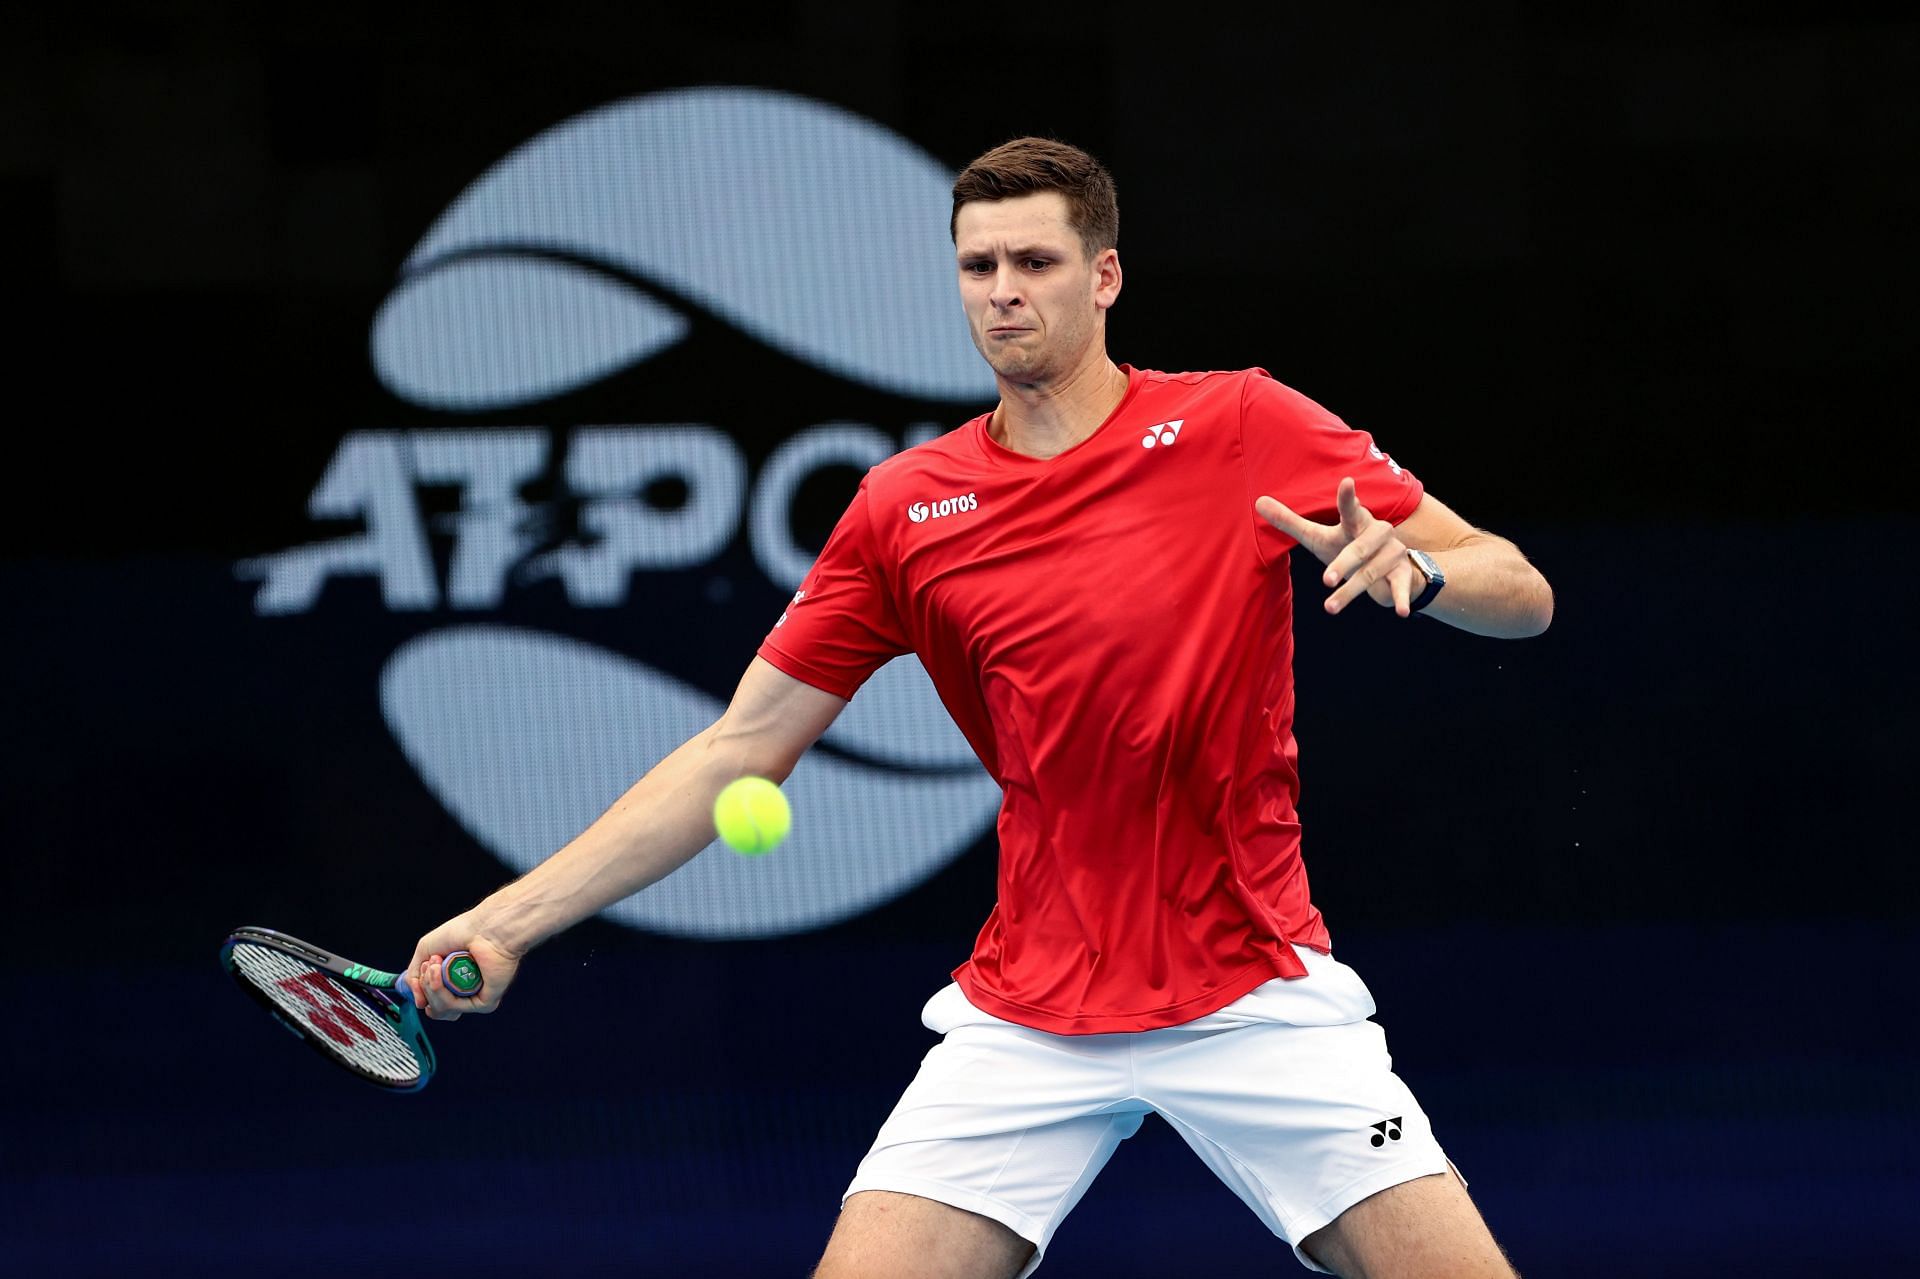 Hubert Hurkacz will be eager to be at his best and help Poland qualify for the semifinals of the ATP Cup